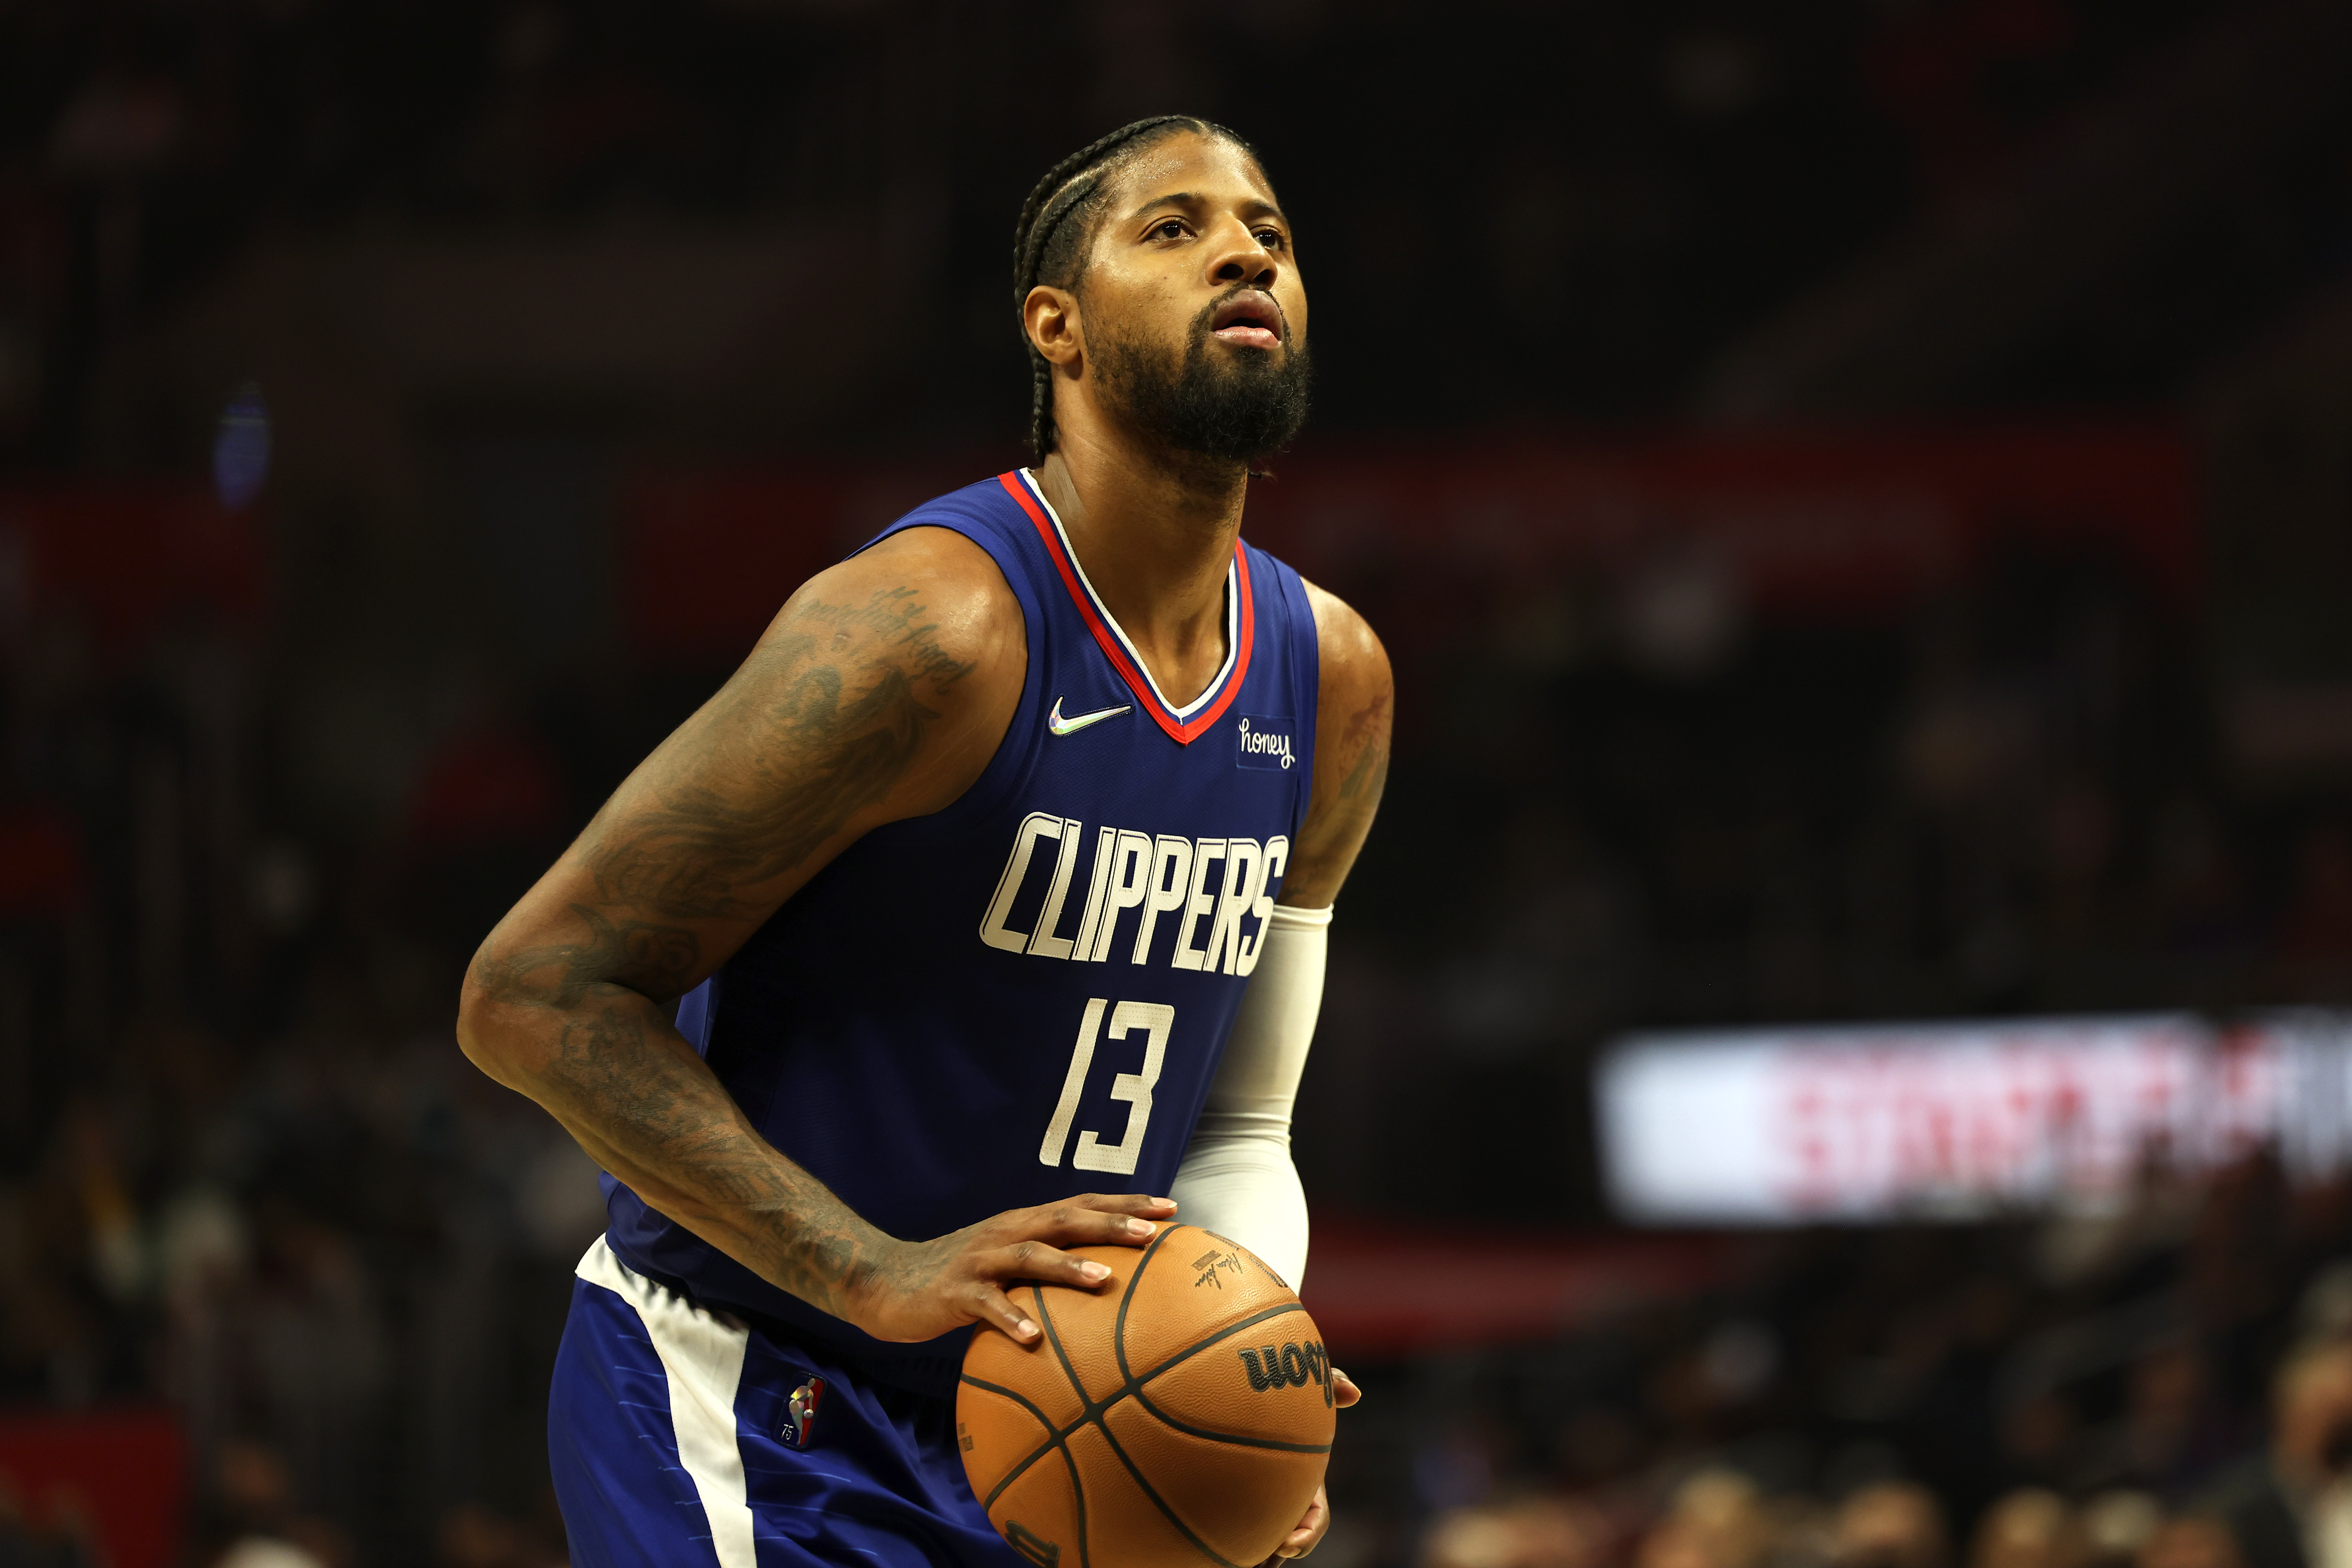 Paul George #13 of the LA Clippers shoots a free throw against the Oklahoma City Thunder on November 1, 2021 at STAPLES Center in Los Angeles, California.